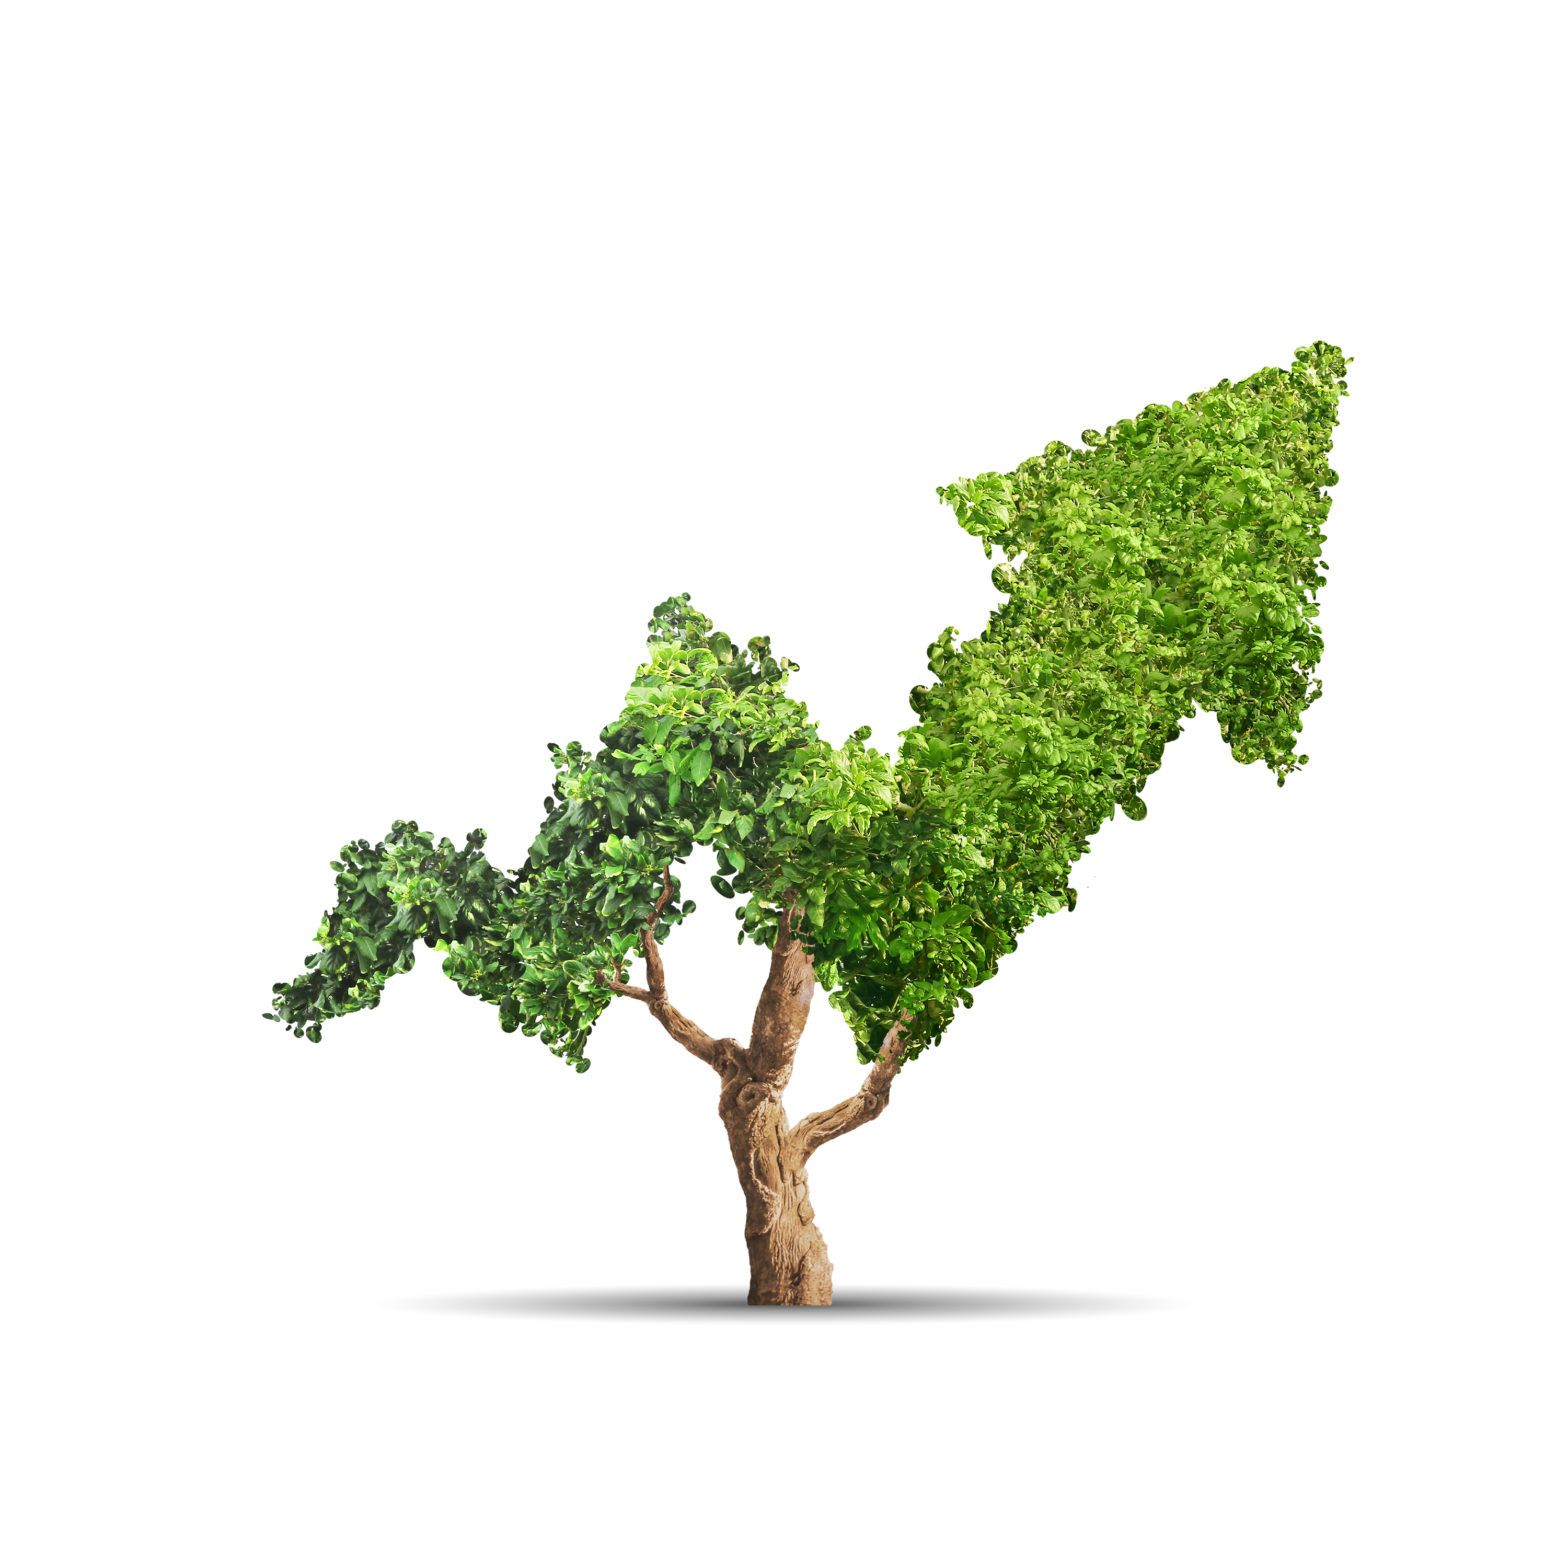 Franklin Templeton offers actively-managed Euro green bond ETF